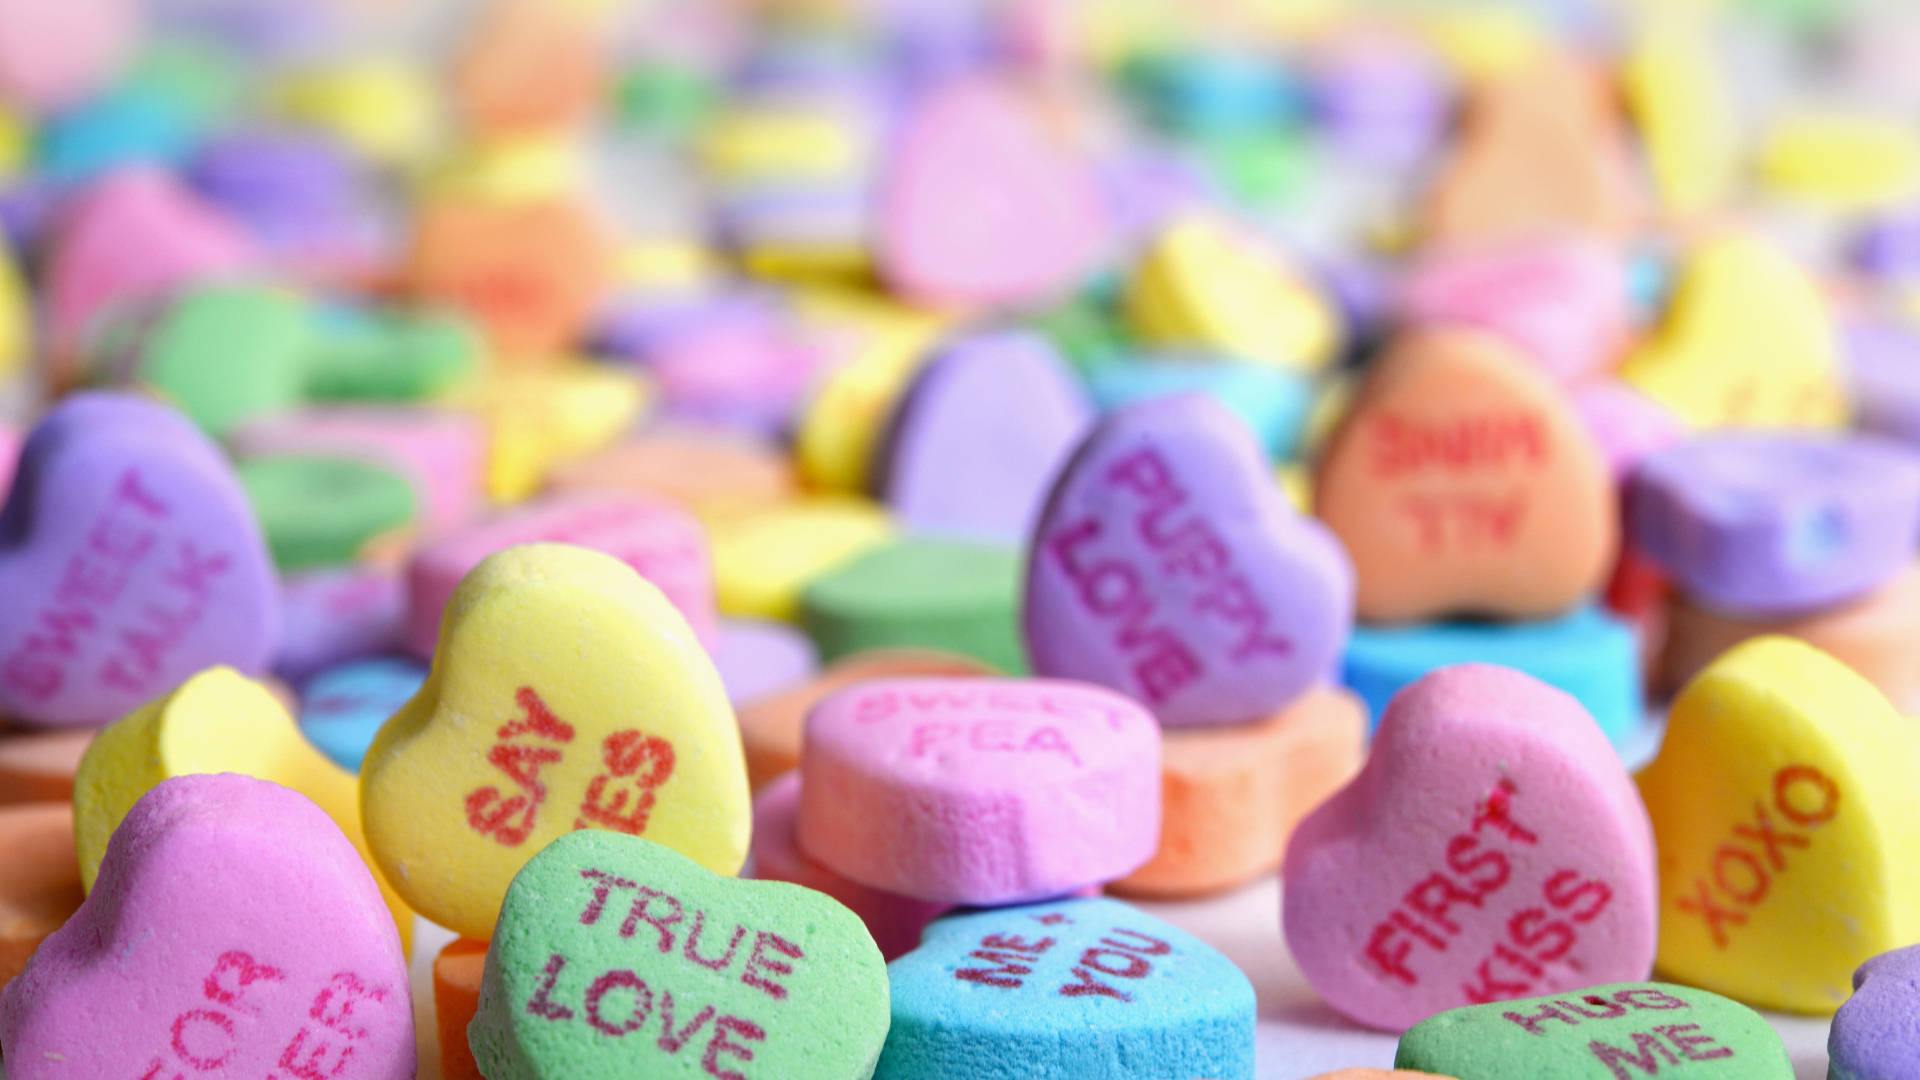 Spread The Love This Season With Colorful Pastel Candy Hearts Background